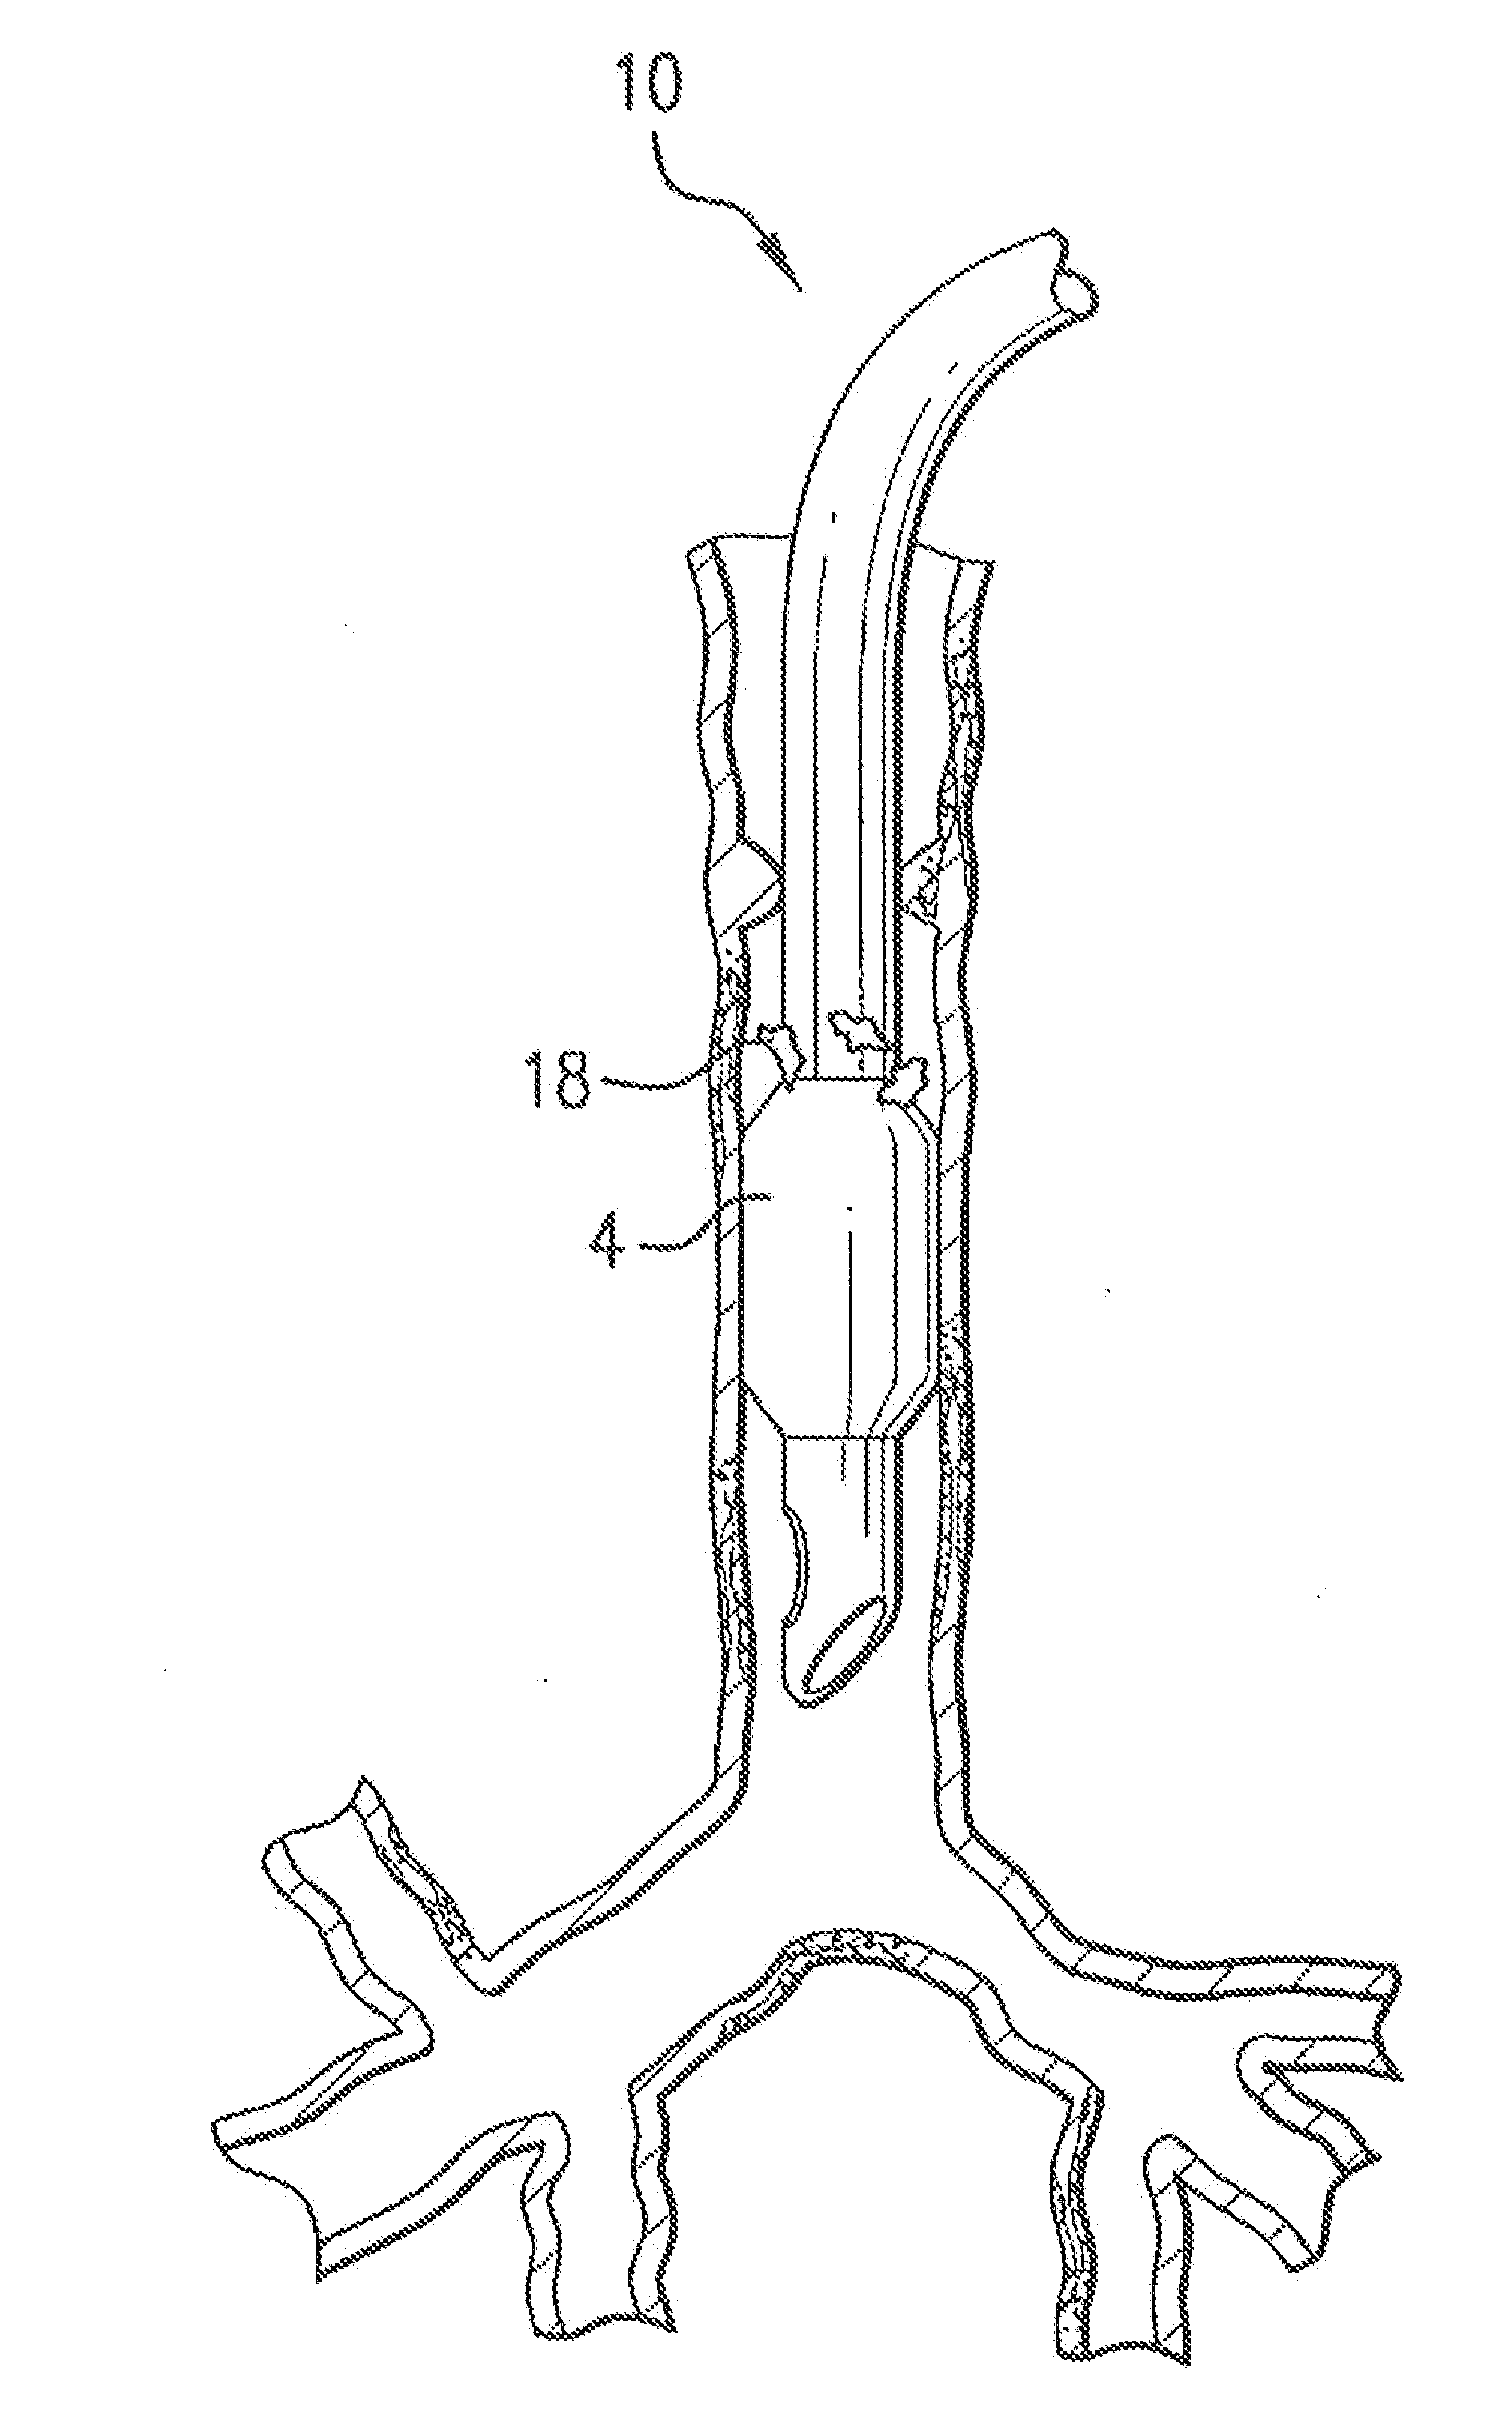 Medical device with antimicrobial layer